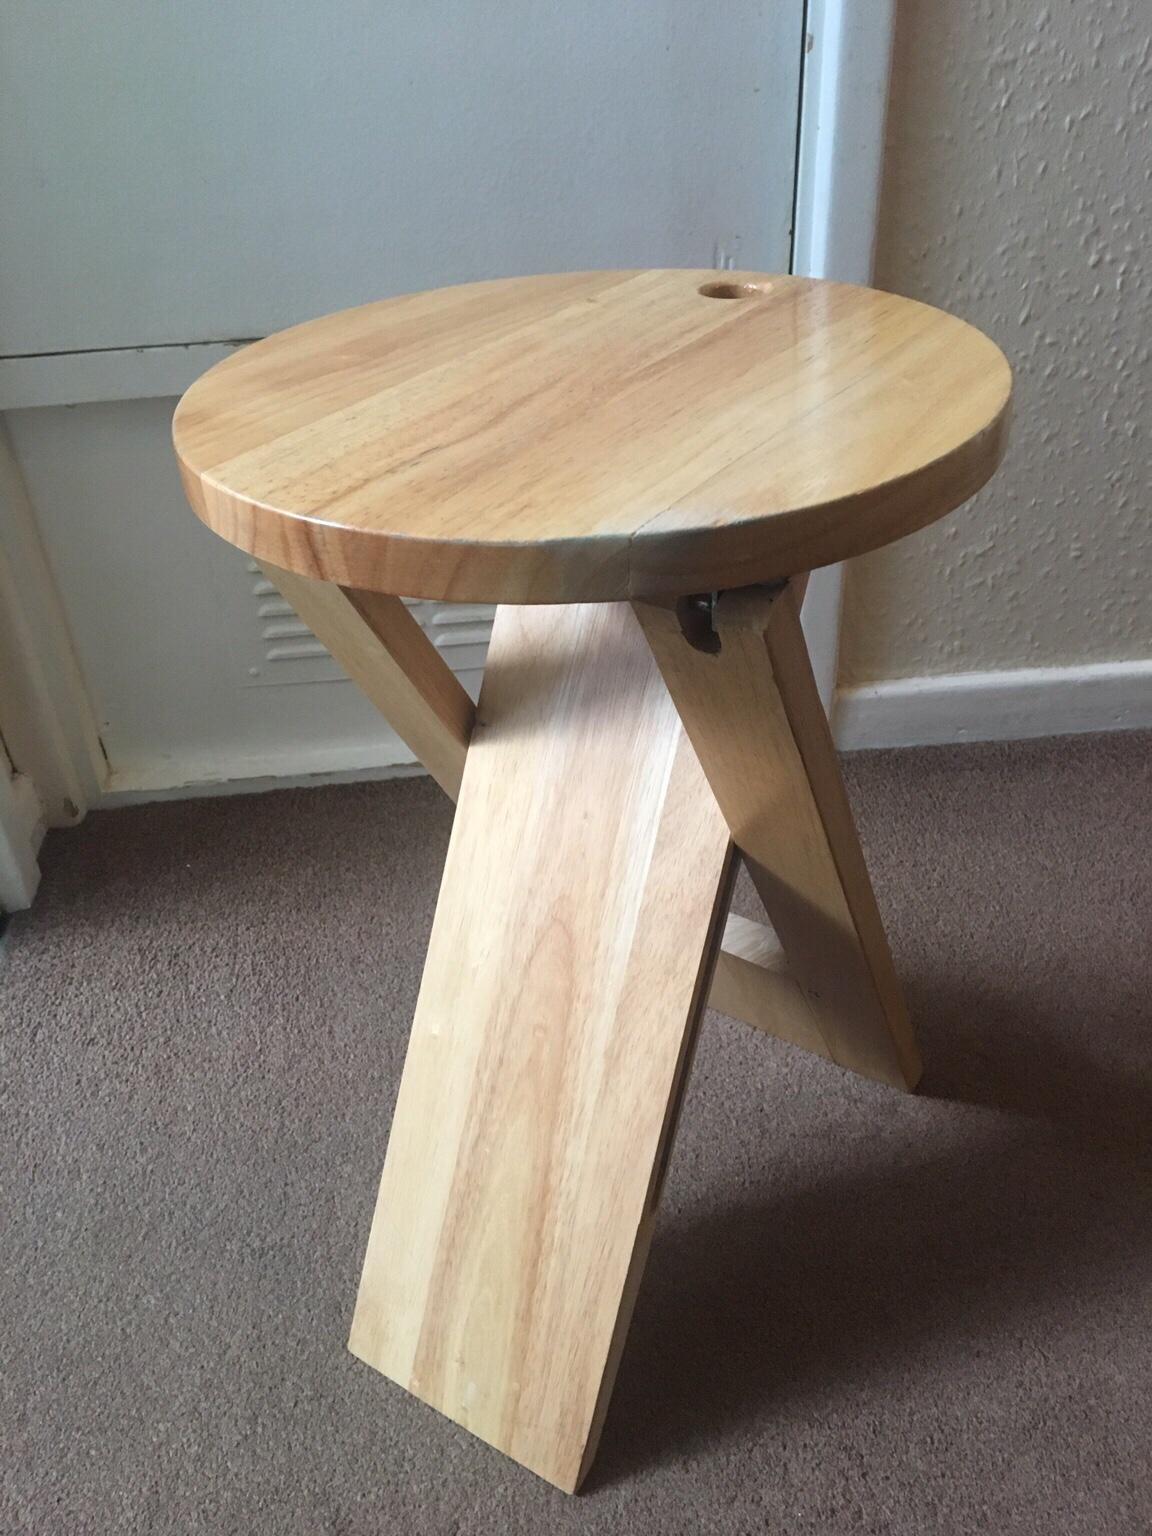 Wooden folding stool/table in LE5 Leicester for £22.00 for sale Shpock